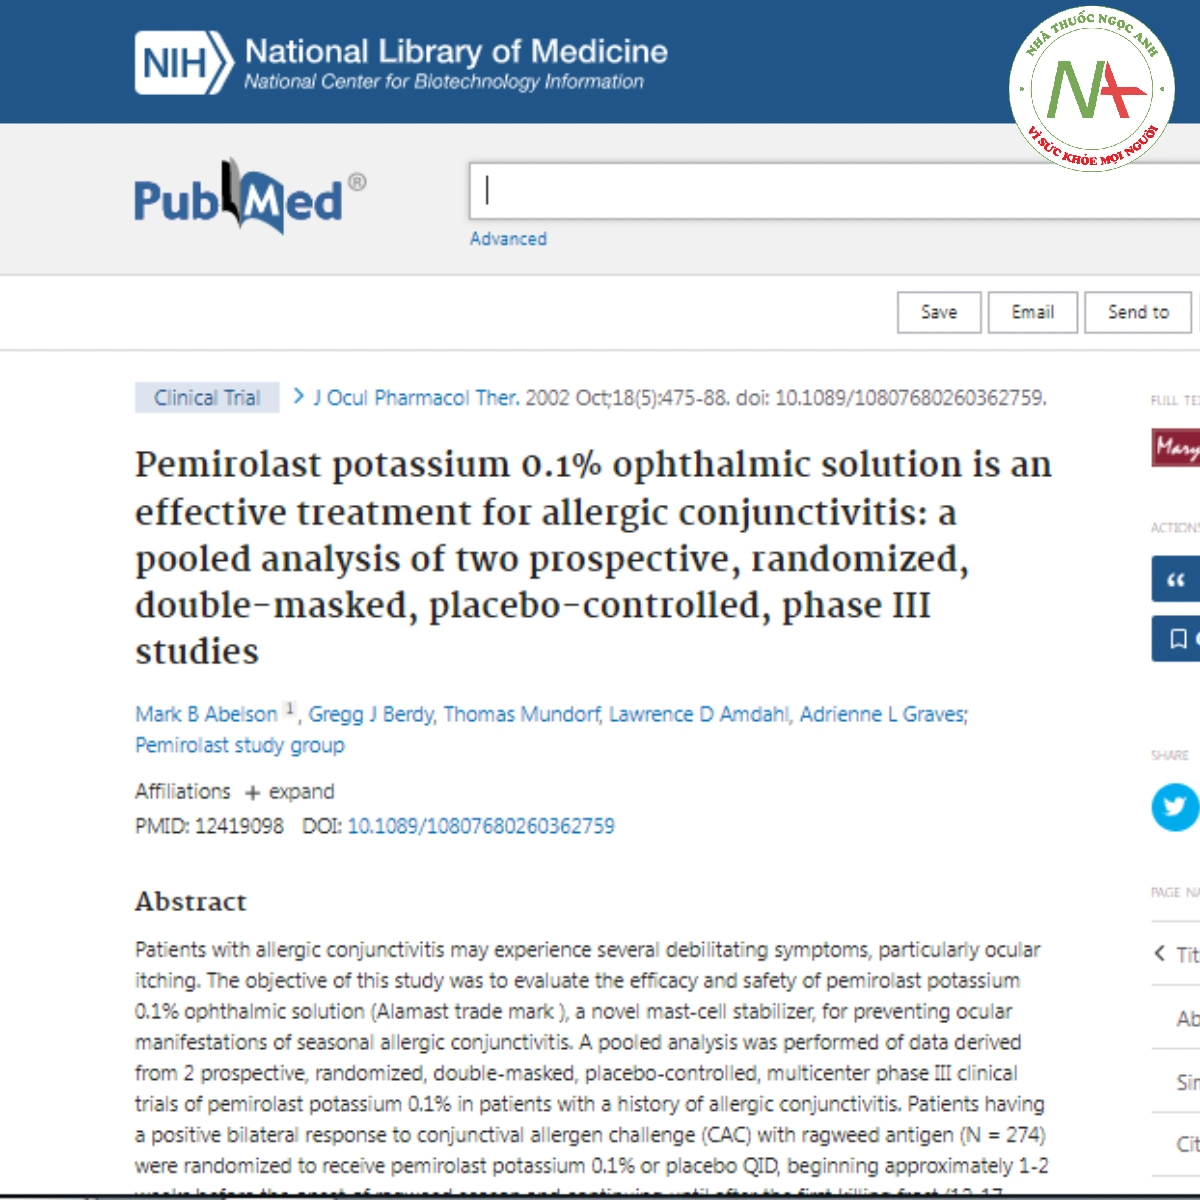 Pemirolast potassium 0.1% ophthalmic solution is an effective treatment for allergic conjunctivitis: a pooled analysis of two prospective, randomized, double-masked, placebo-controlled, phase III studies